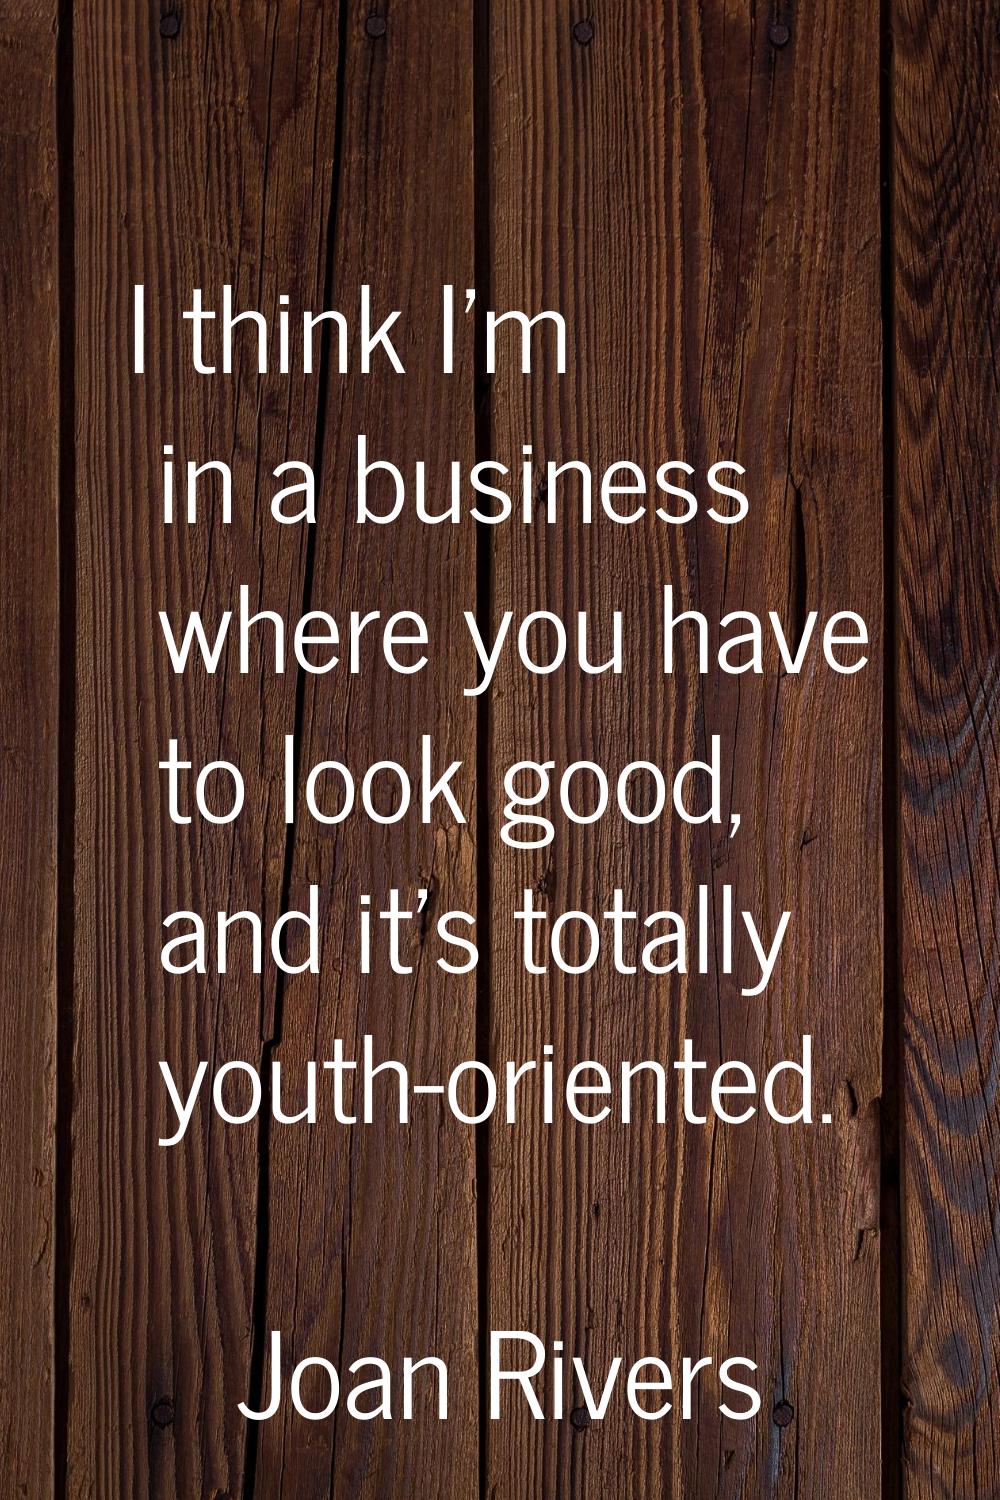 I think I'm in a business where you have to look good, and it's totally youth-oriented.